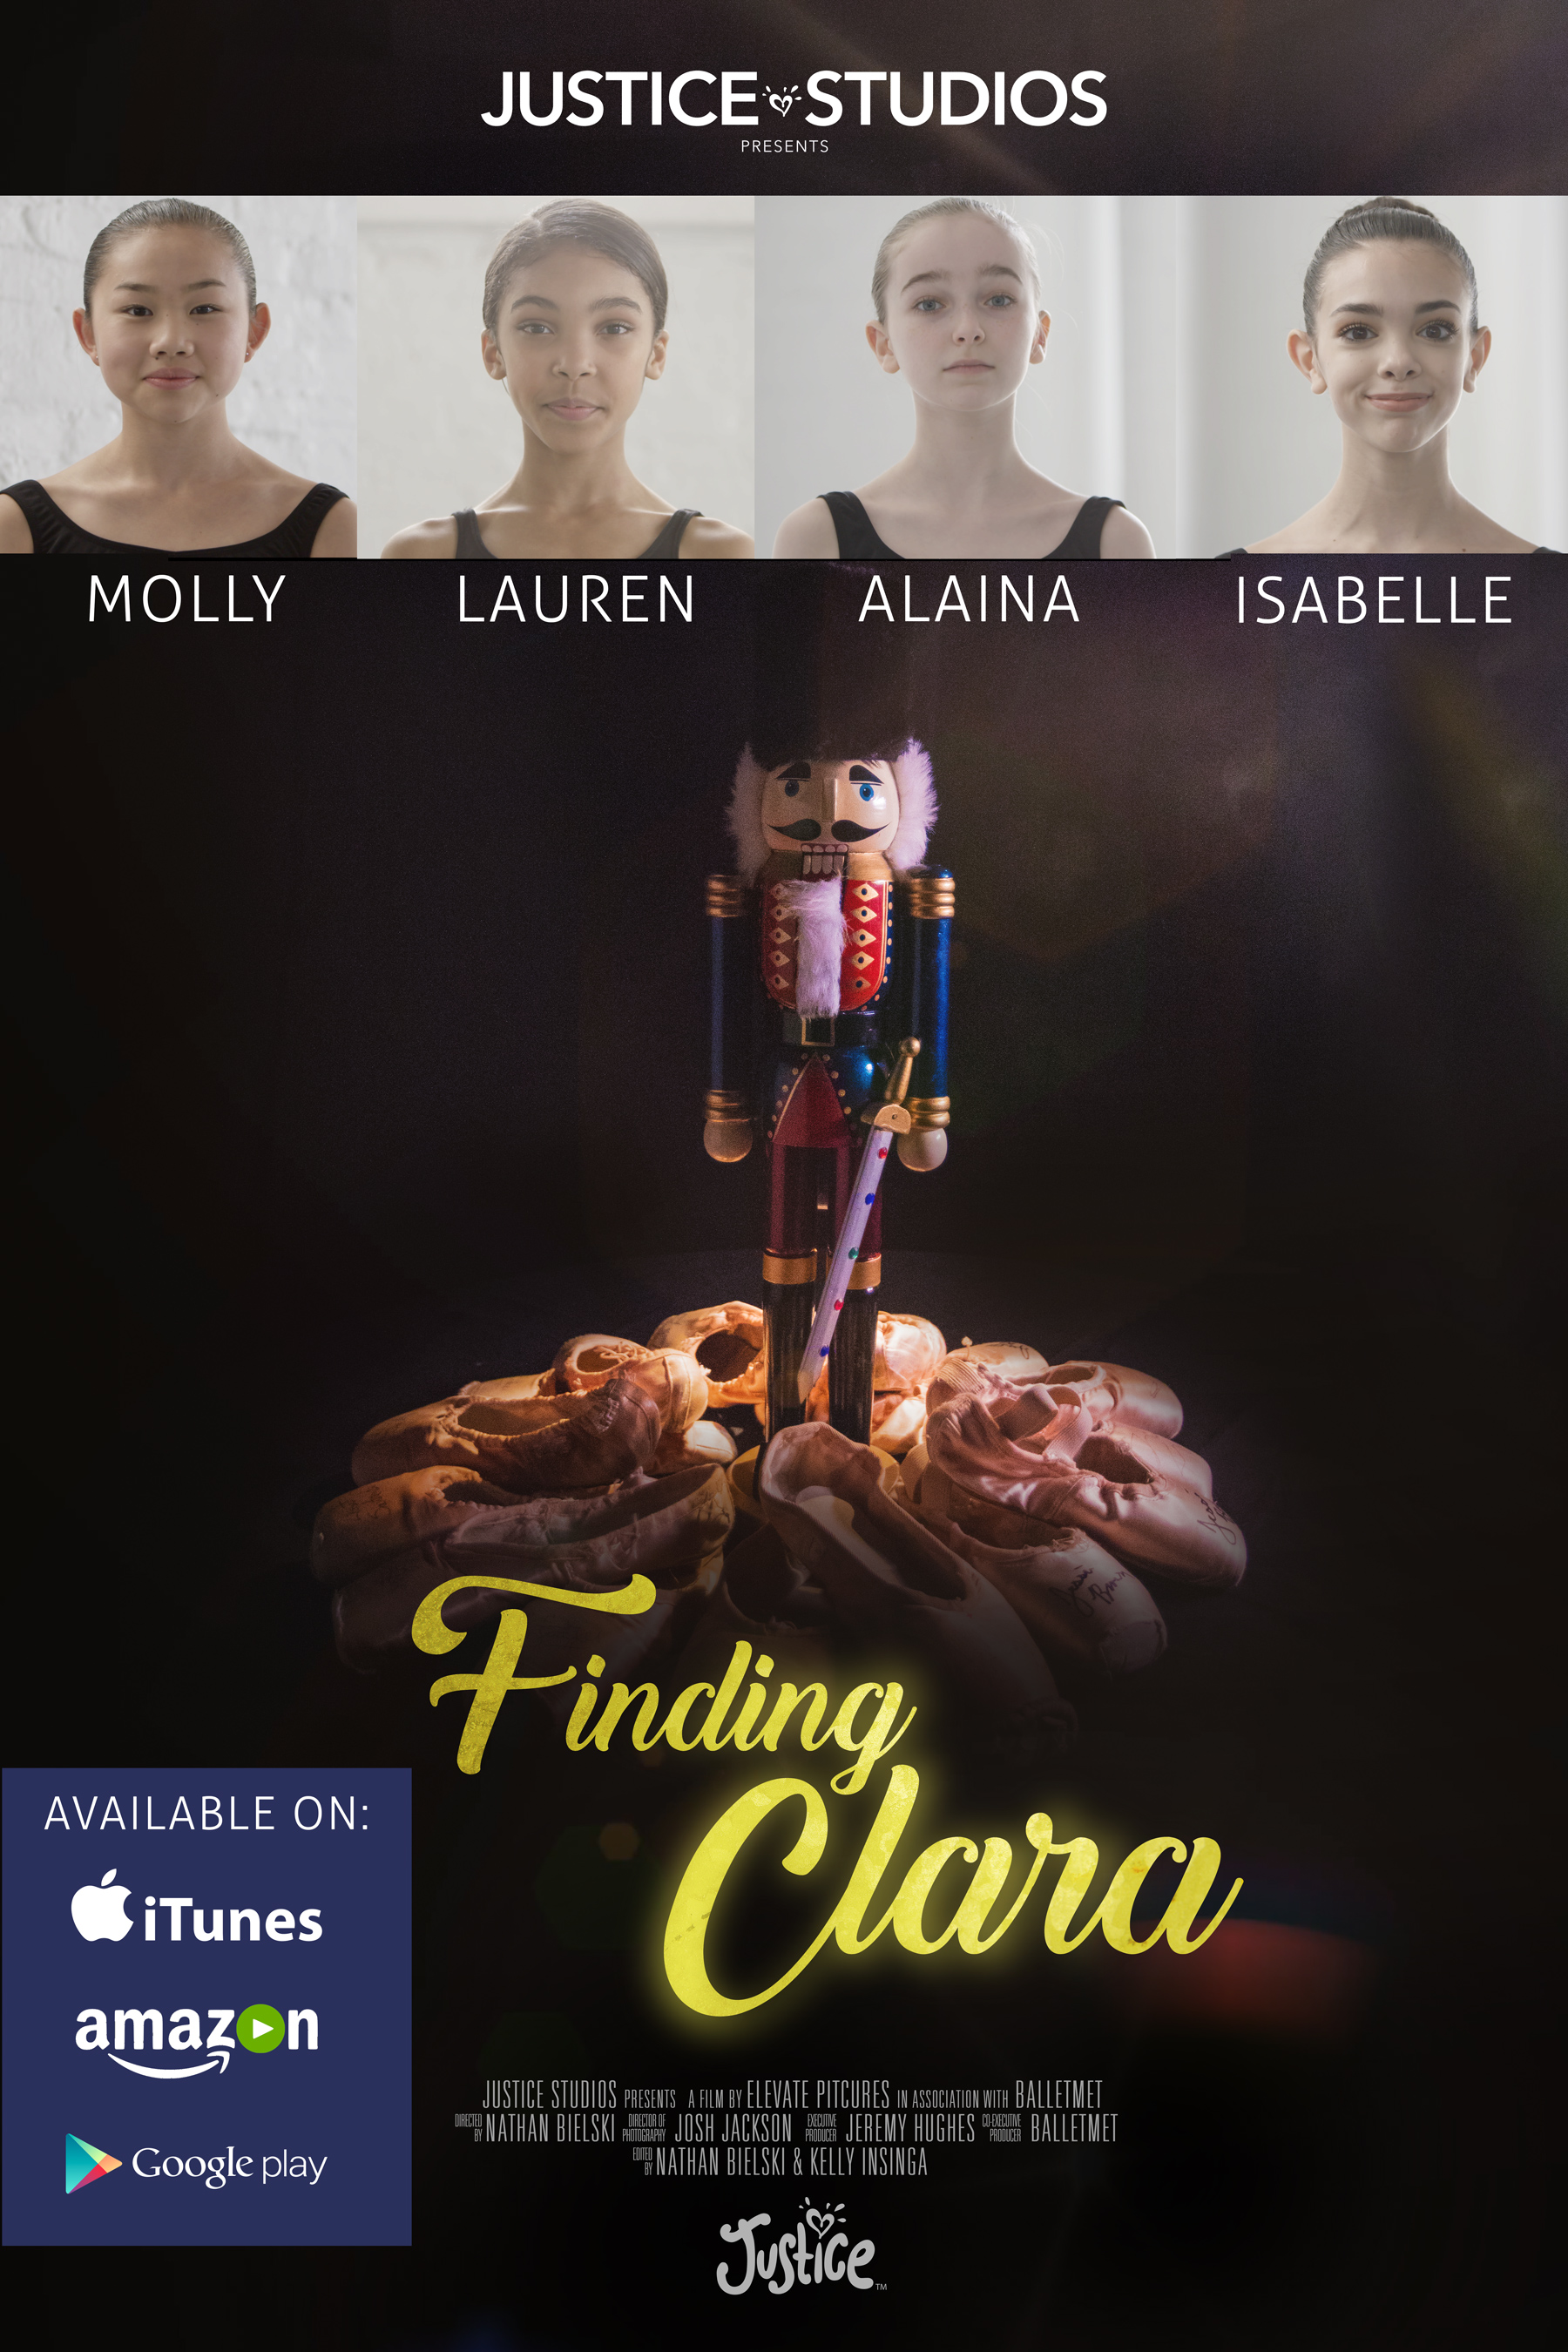 "Finding Clara" Movie - Ballet Documentary from Justice Studios